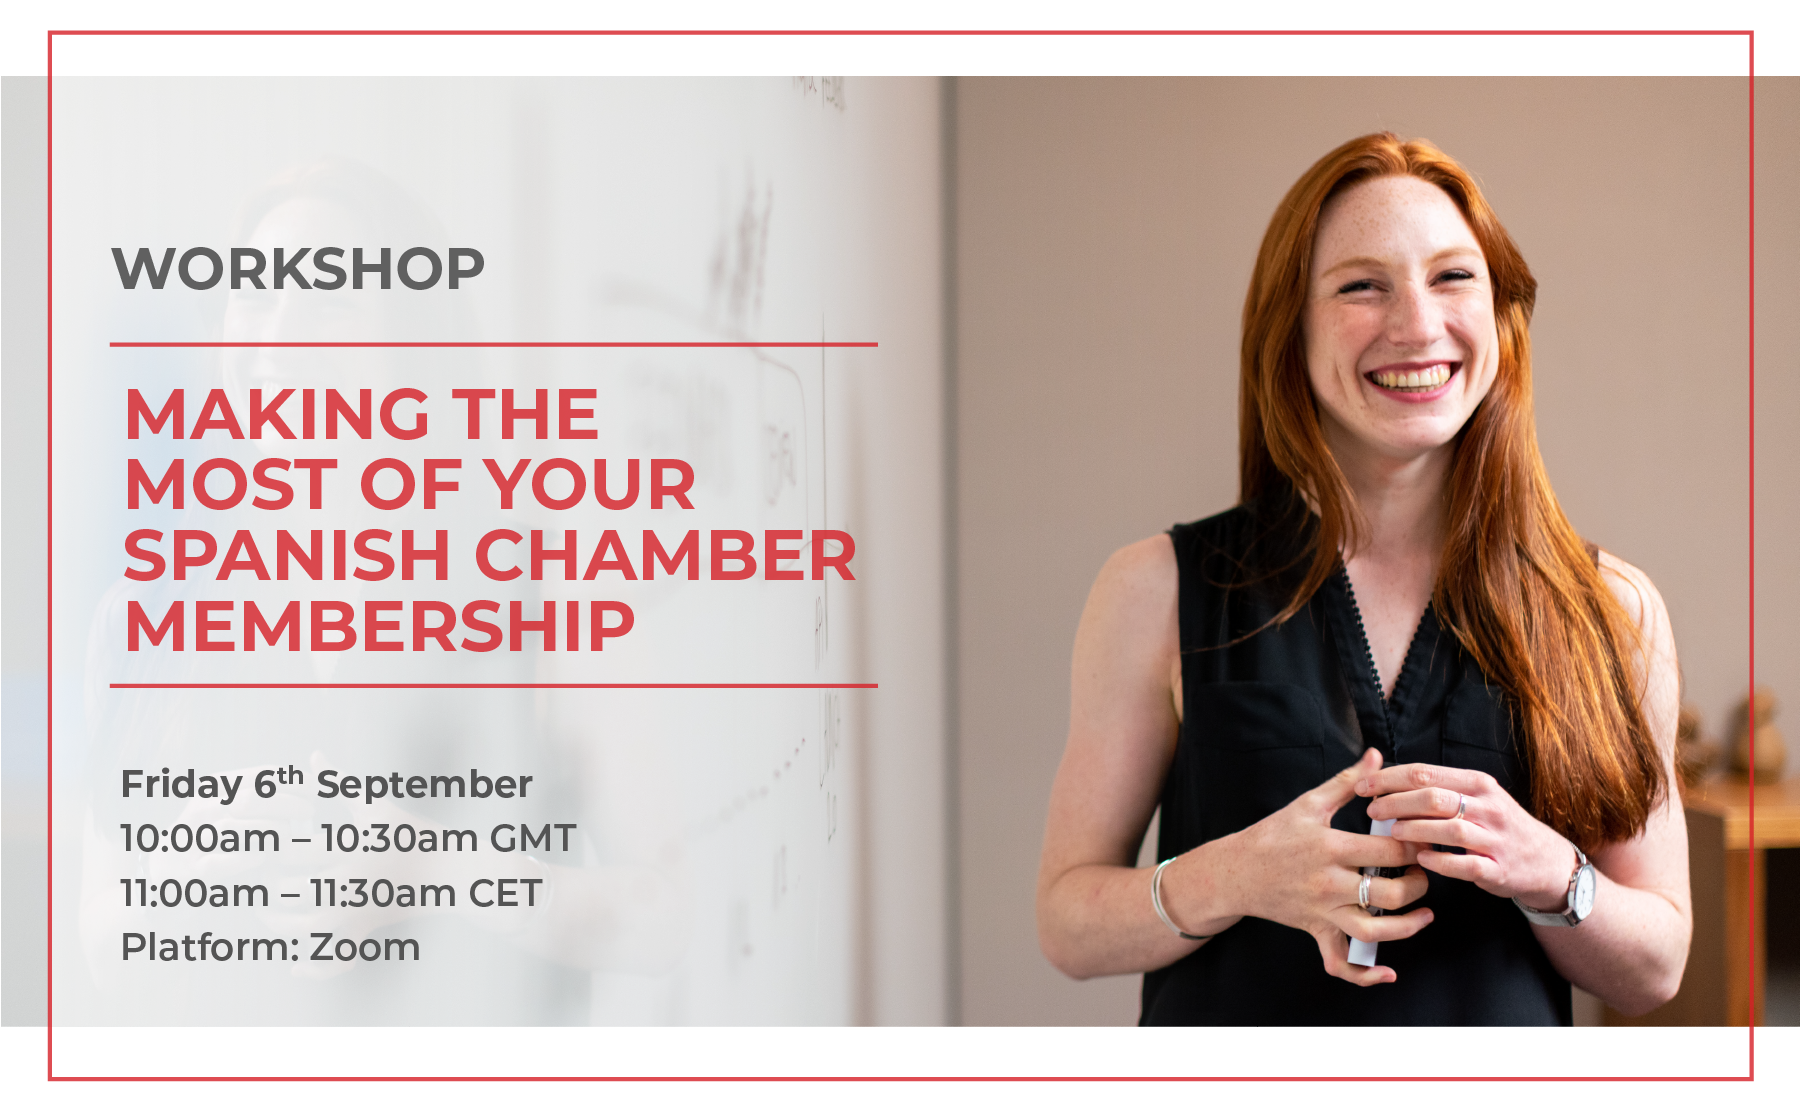 WORKSHOP | MAKING THE MOST OF YOUR SPANISH CHAMBER MEMBERSHIP